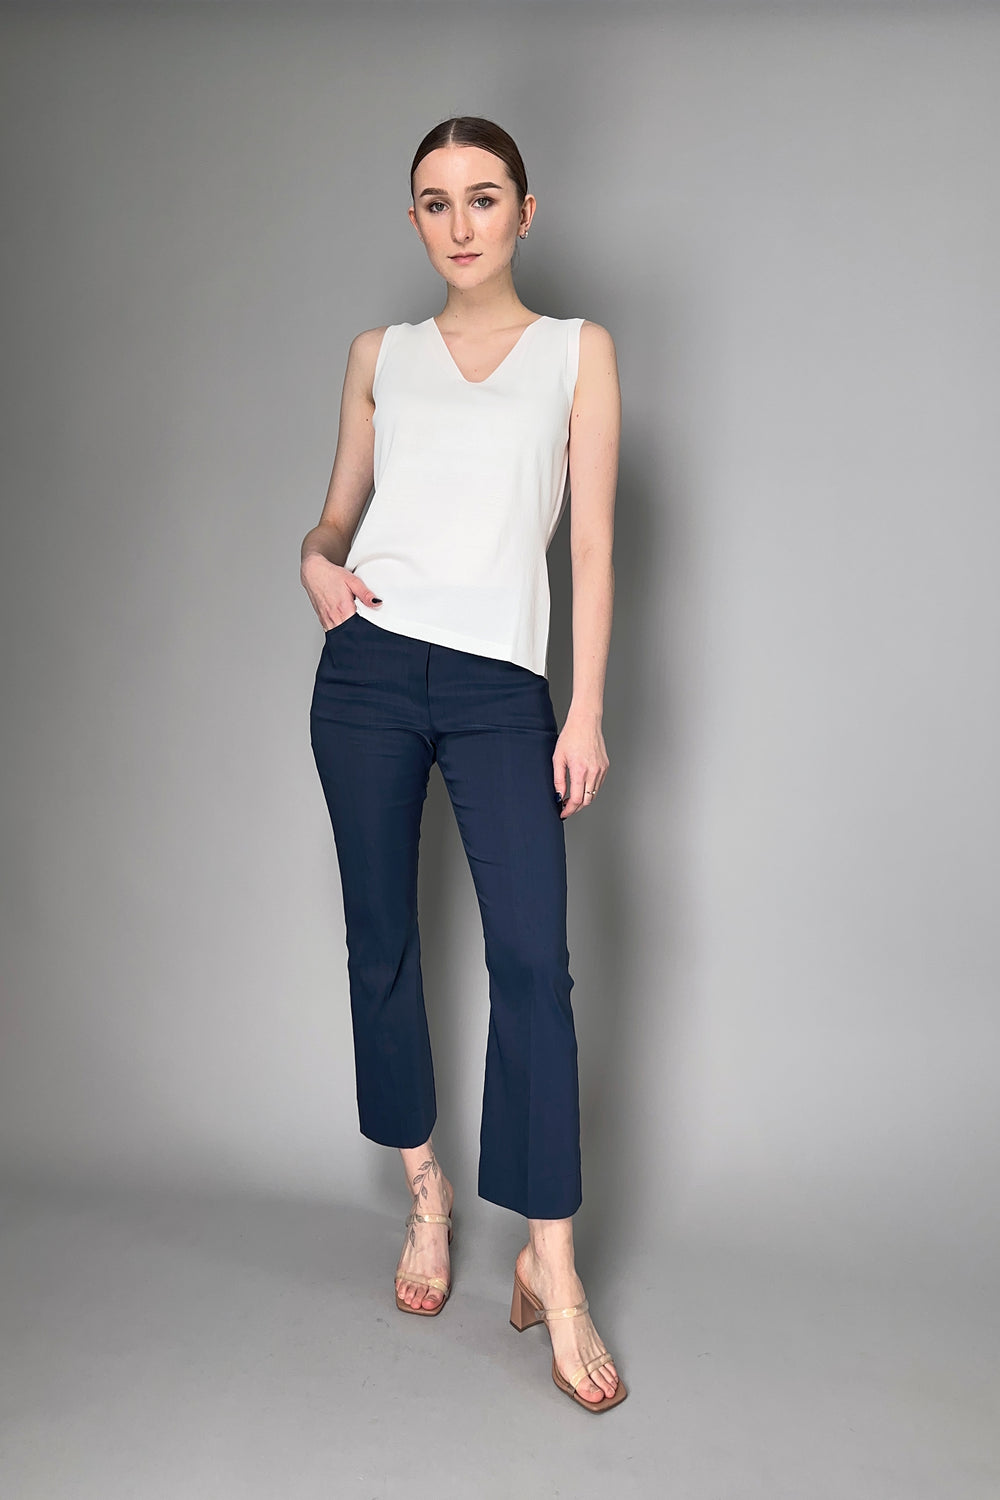 SATIN FINISH LINEN TROUSERS IN NAVY